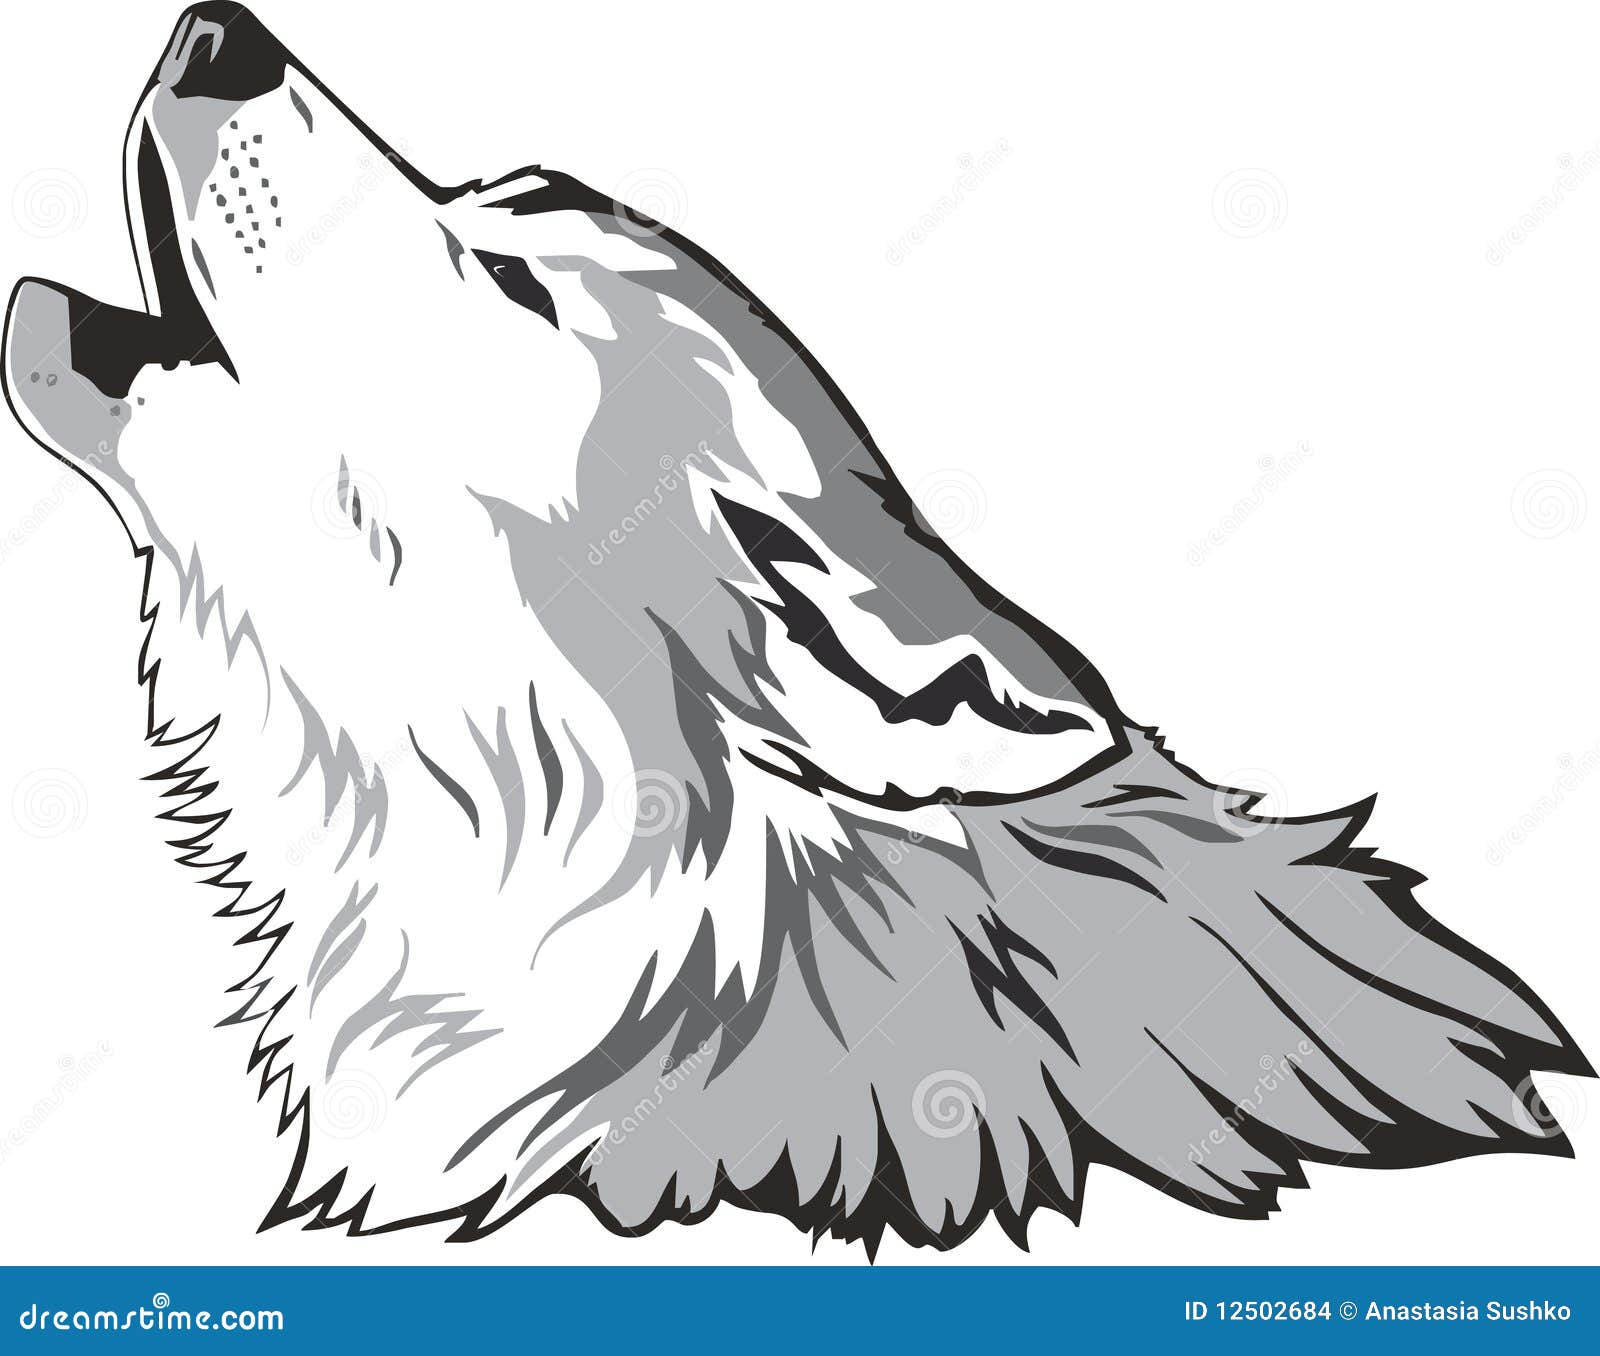 Wolf head vector stock illustration. Image of sign, shaggy - 12502684